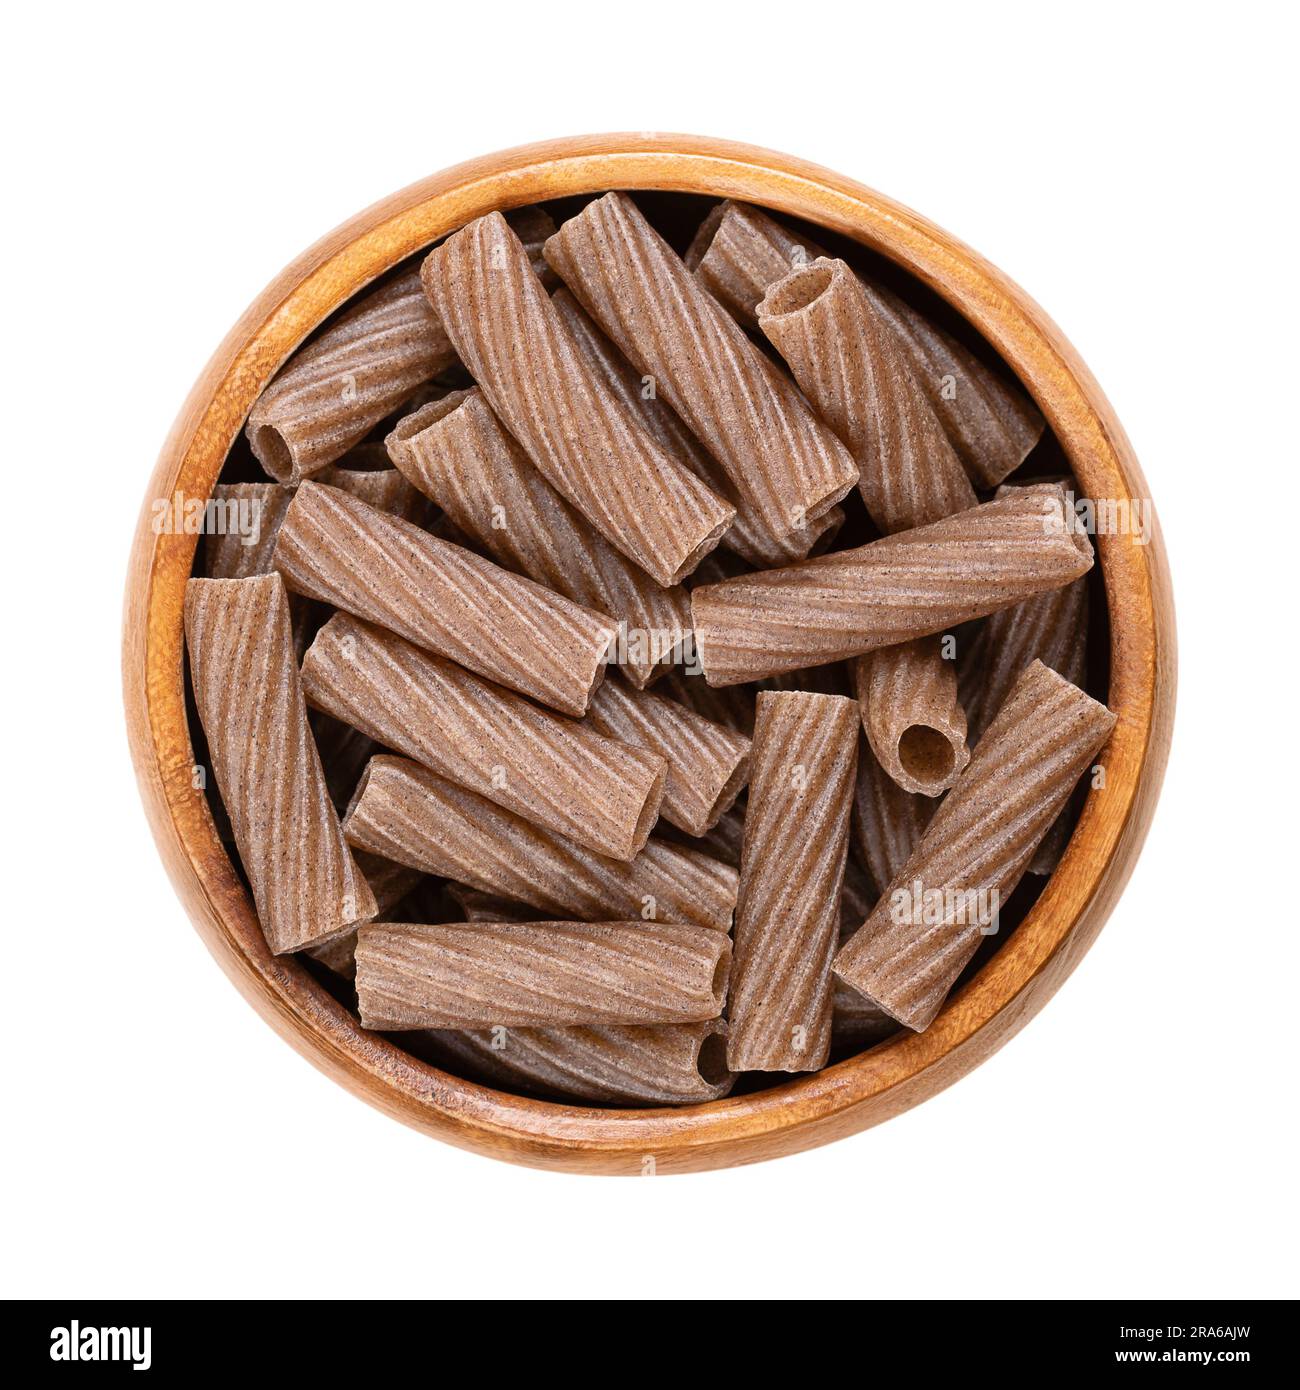 Buckwheat tortiglioni, gluten free whole grain pasta, in a wooden bowl. Dark brown dried noodles made of buckwheat semolina, extruded into cylinders. Stock Photo